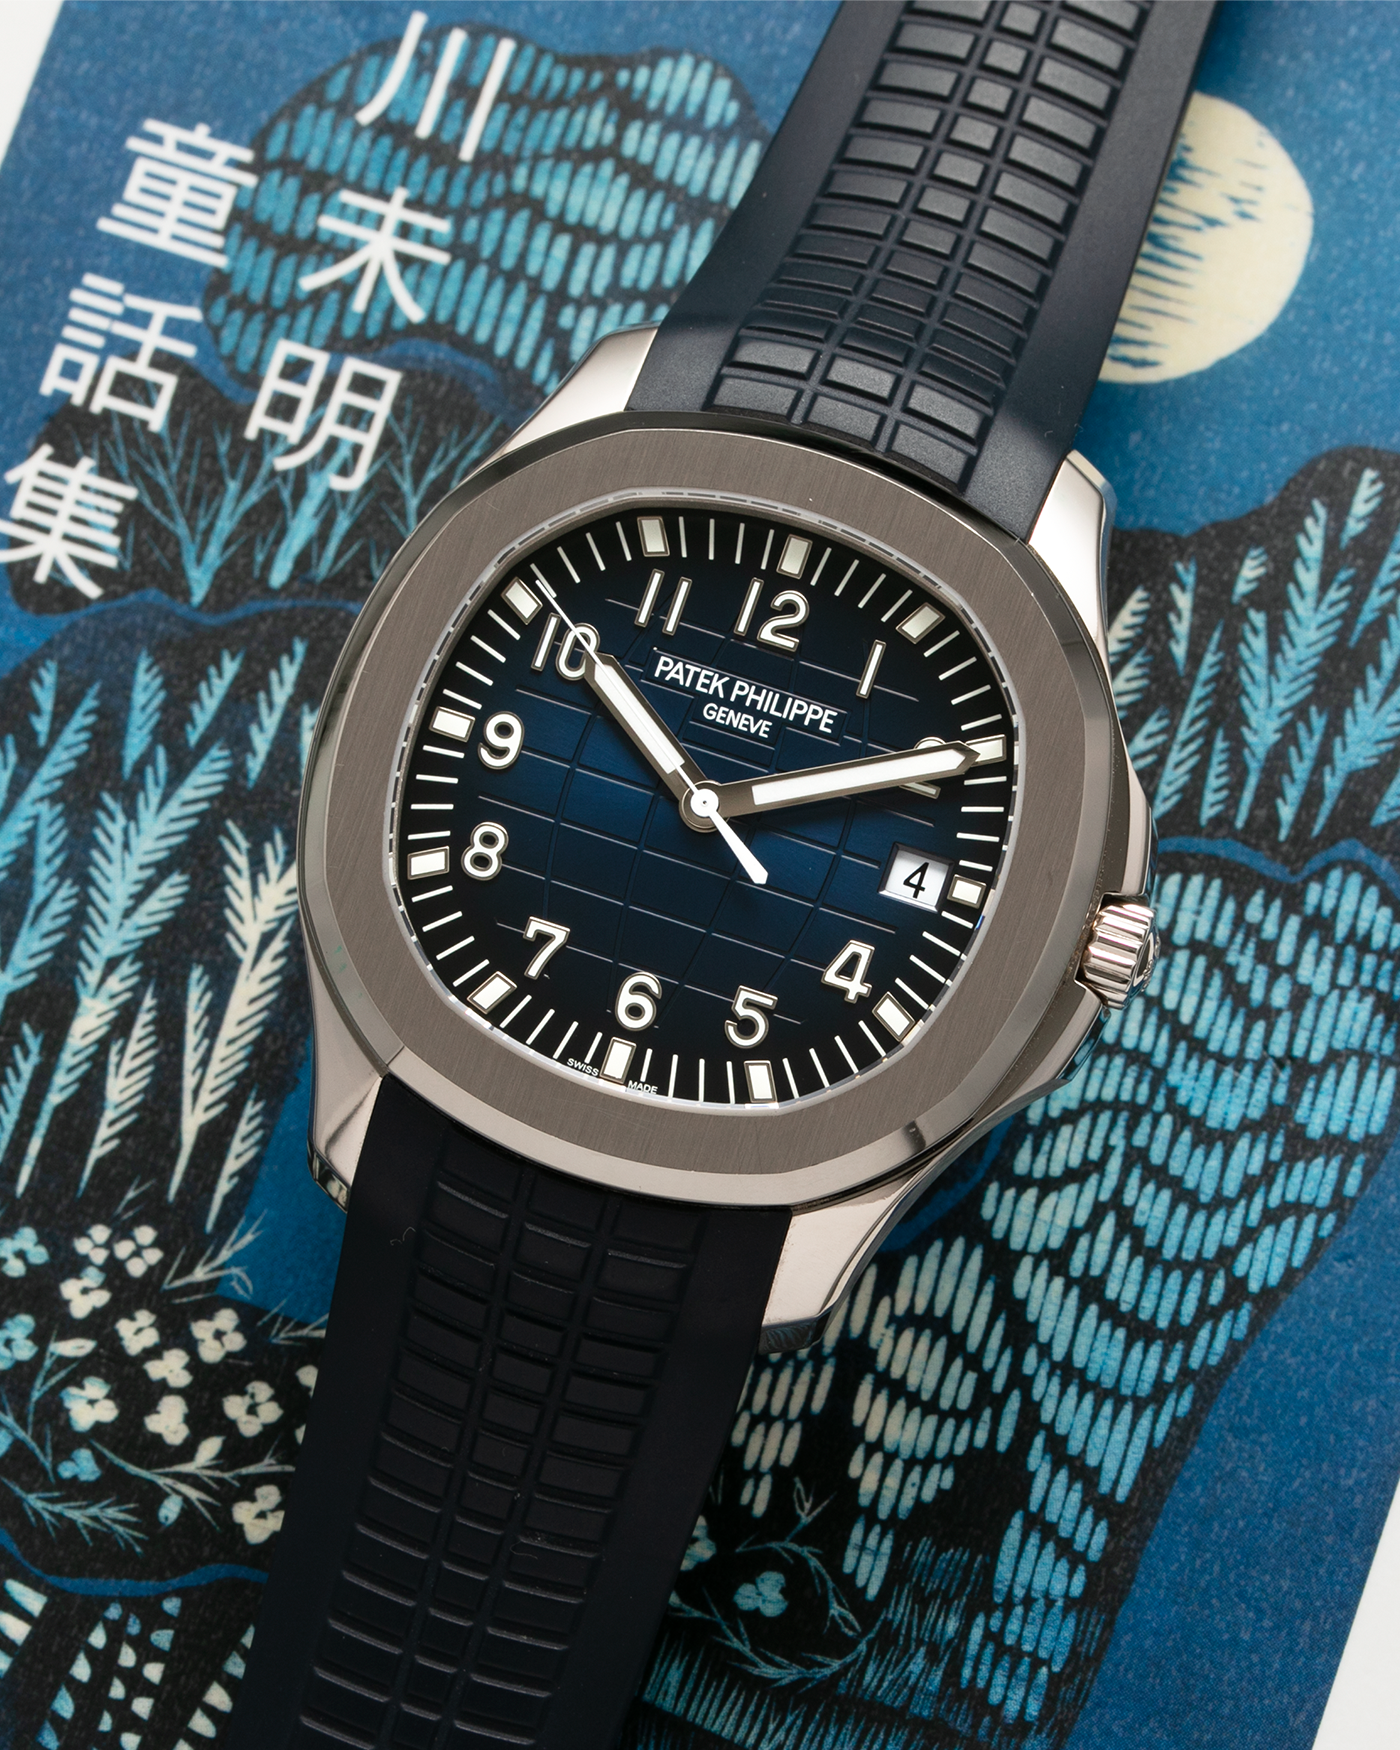 Brand: Patek Philippe Year: 2017 Model: Aquanaut Reference Number: 5168G-001 Material: 18-carat White Gold Movement: Patek Philippe Cal. 324 S C, Self-Winding Case Diameter: 42.2mm x 8.25mm Strap: Patek Philippe Aquanaut Tropical Composite Midnight Blue Strap with Signed 18-carat White Gold Deployant Clasp